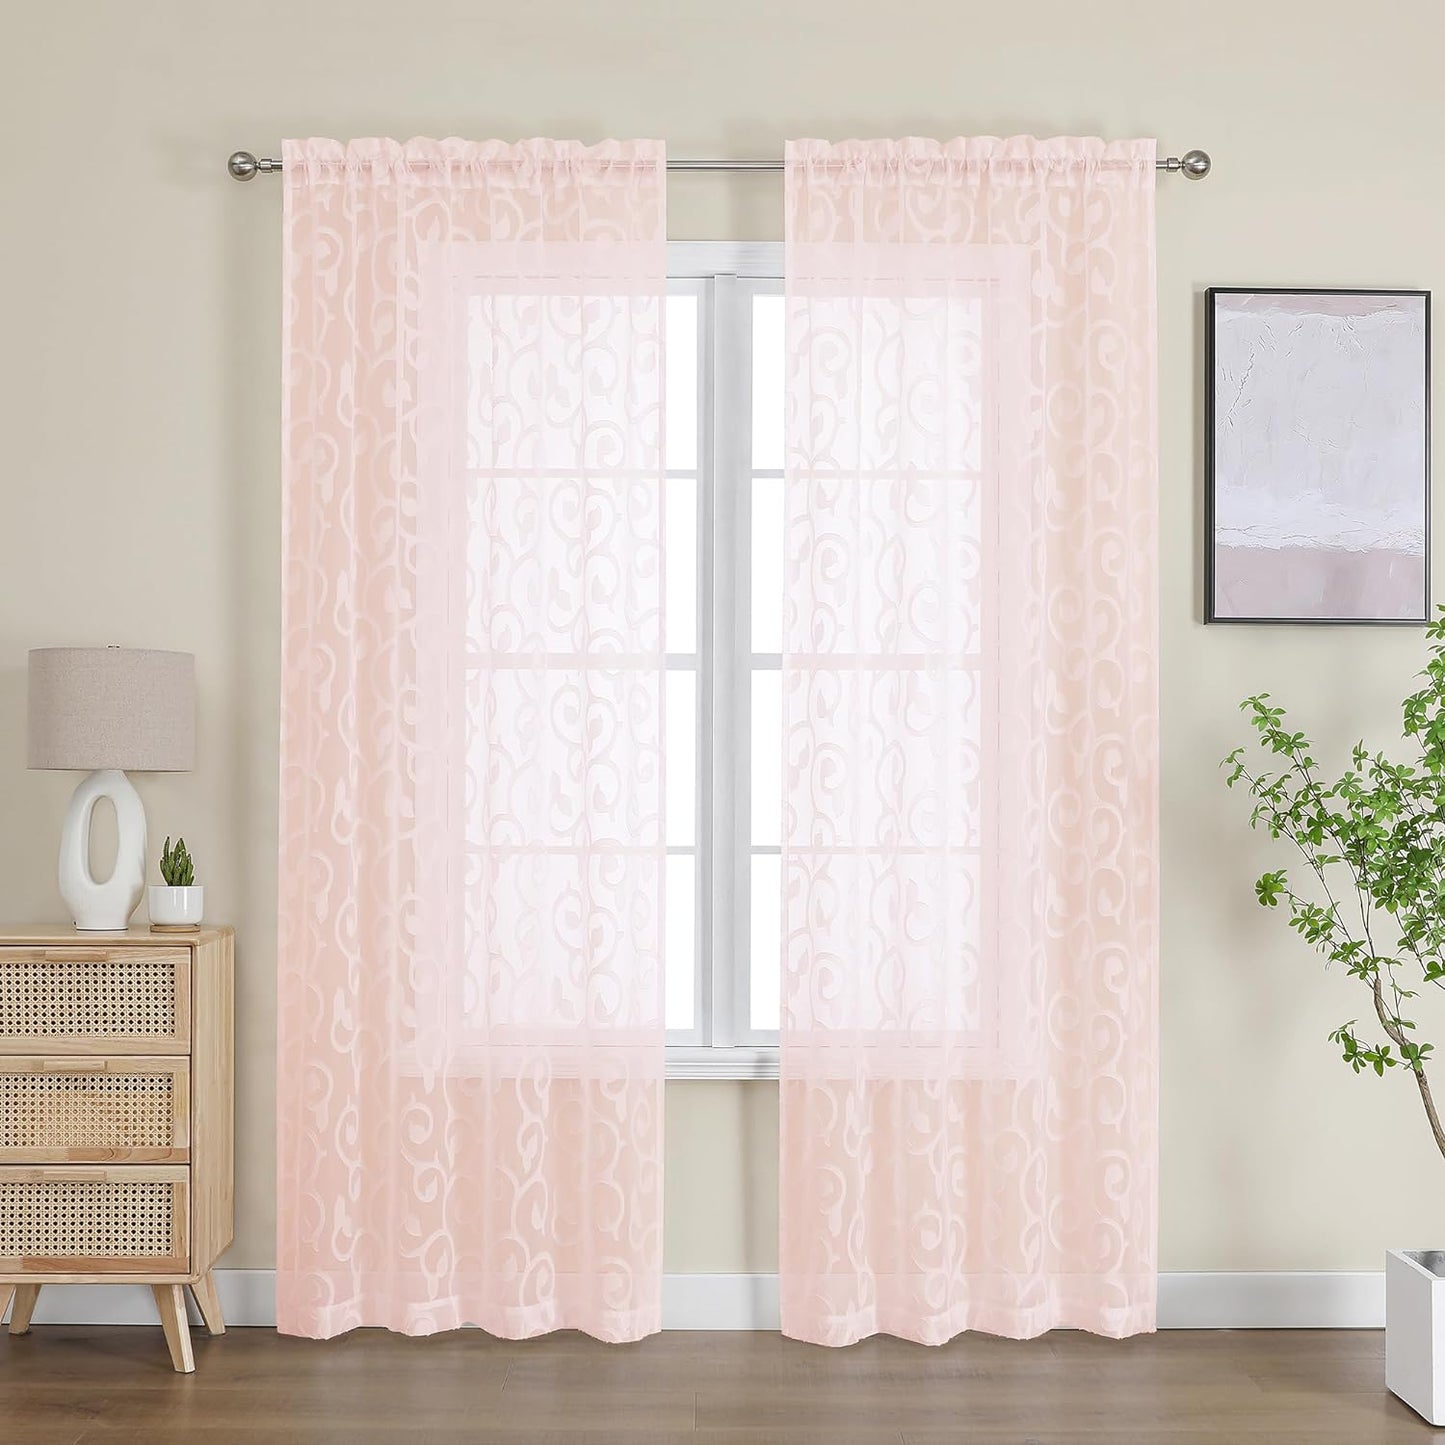 OWENIE Furman Sheer Curtains 84 Inches Long for Bedroom Living Room 2 Panels Set, Light Filtering Window Curtains, Semi Transparent Voile Top Dual Rod Pocket, Grey, 40Wx84L Inch, Total 84 Inches Width  OWENIE Blush 40W X 84L 